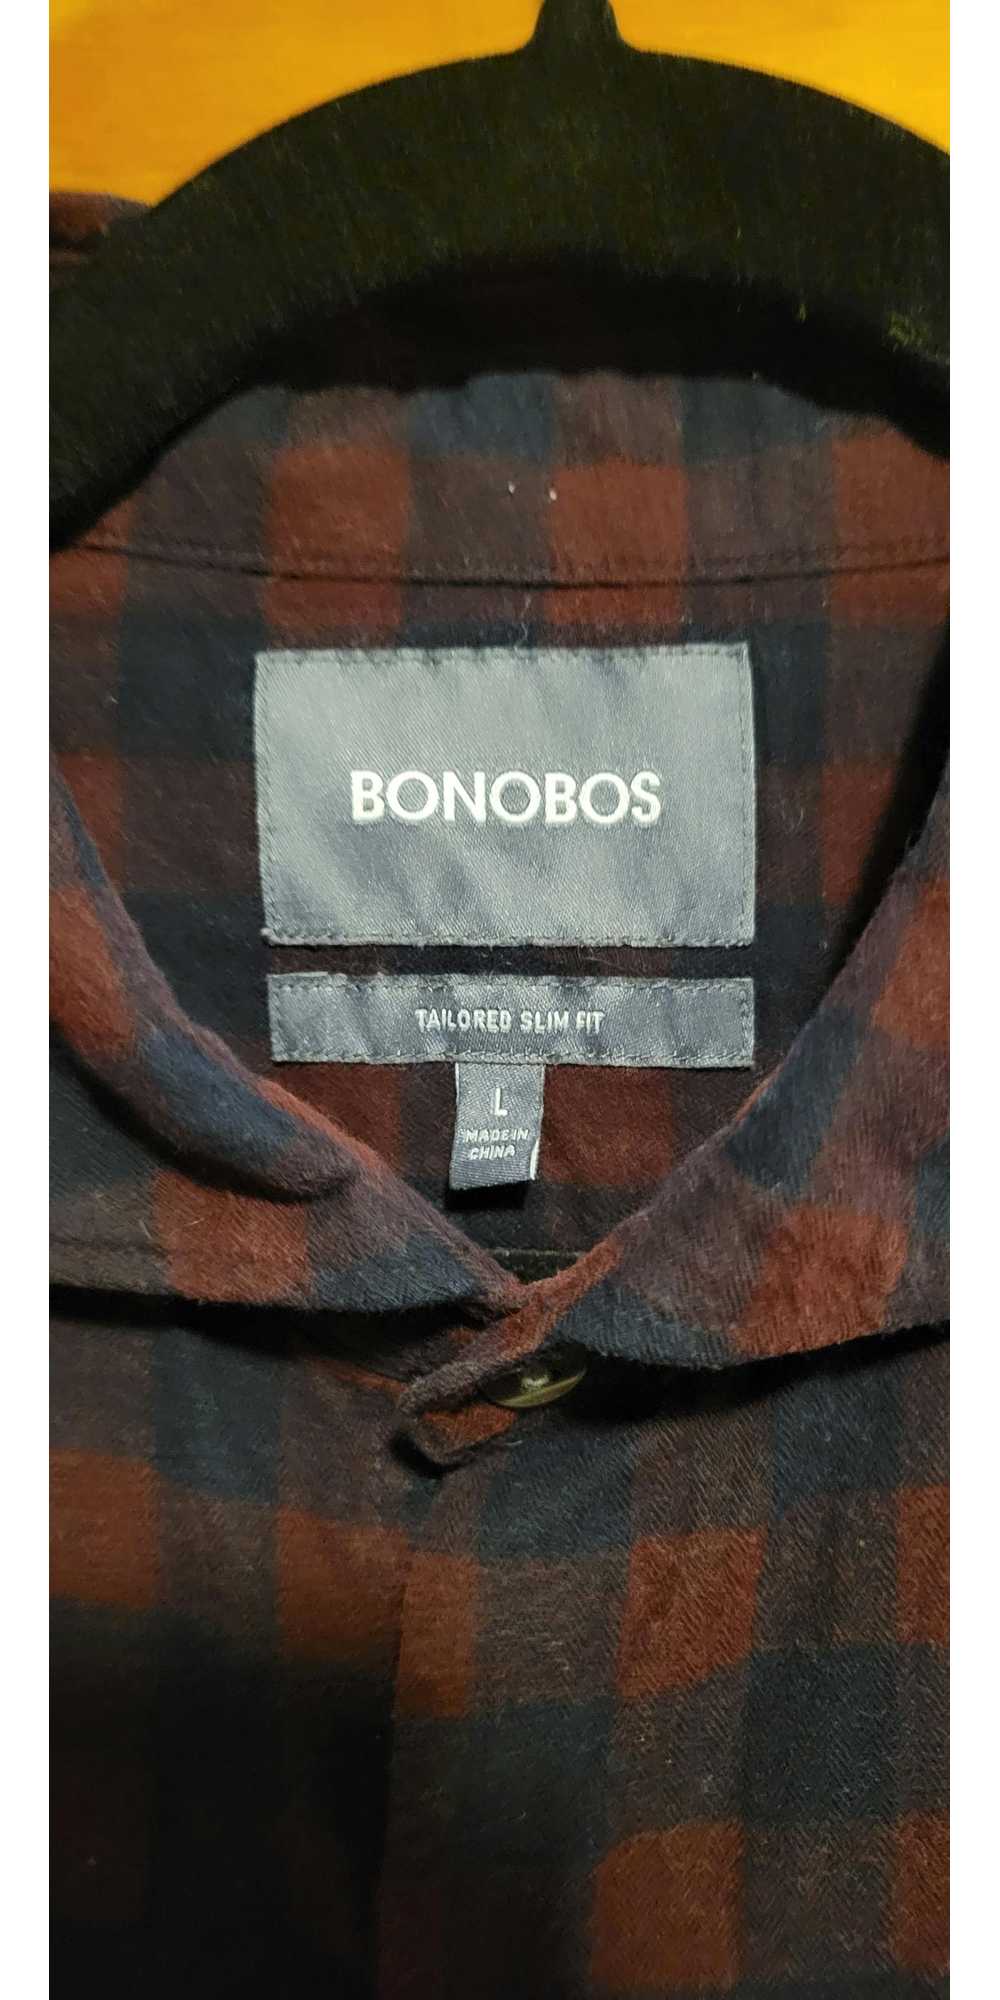 Bonobos Check Flannel - Tailored Slim Fit - image 2